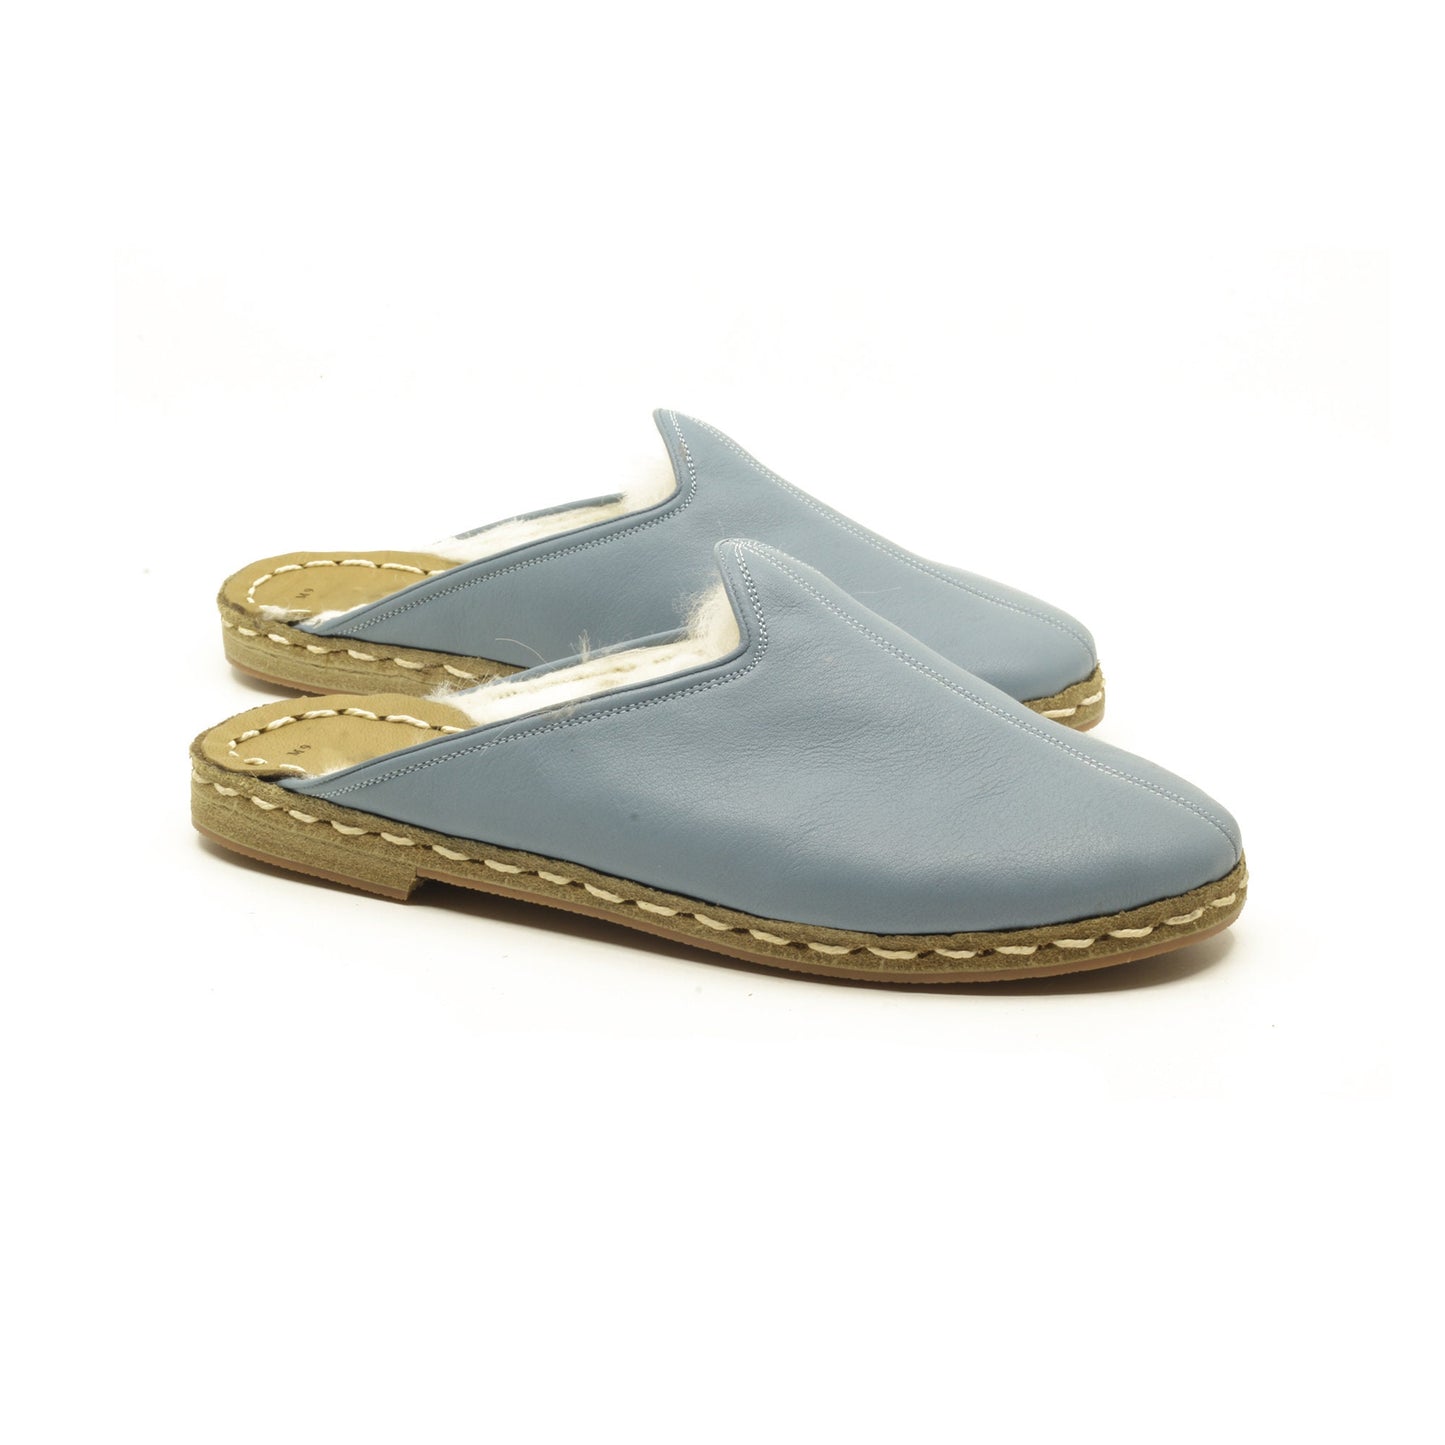 Winter Slippers  - Sheepskin slippers  - Close Toed Slippers -Light Blue Leather – Rubber Sole - For Women